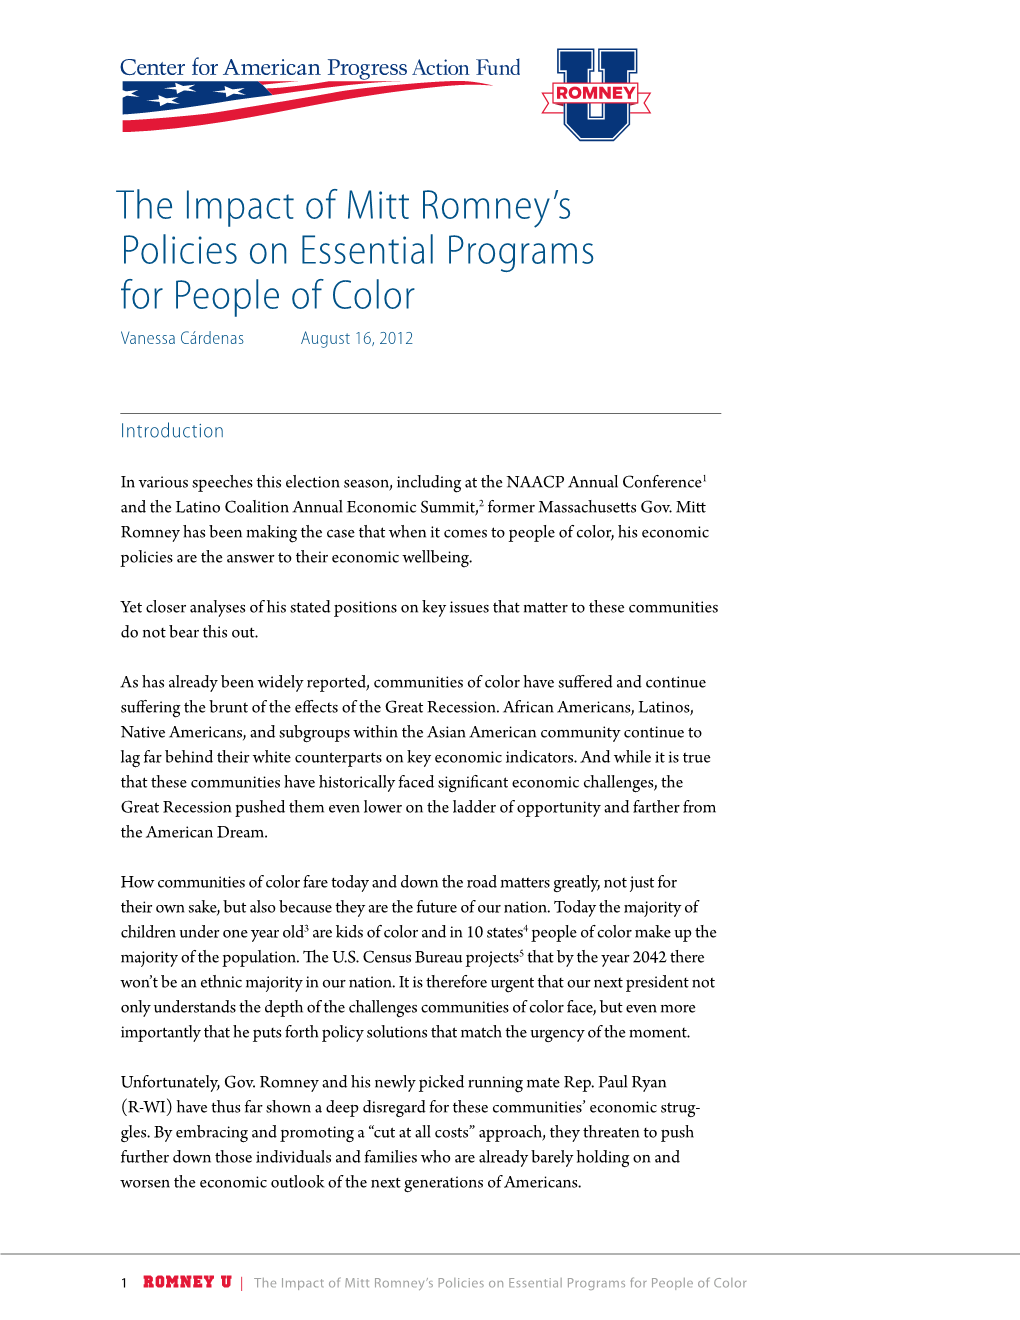 The Impact of Mitt Romney's Policies on Essential Programs for People Of